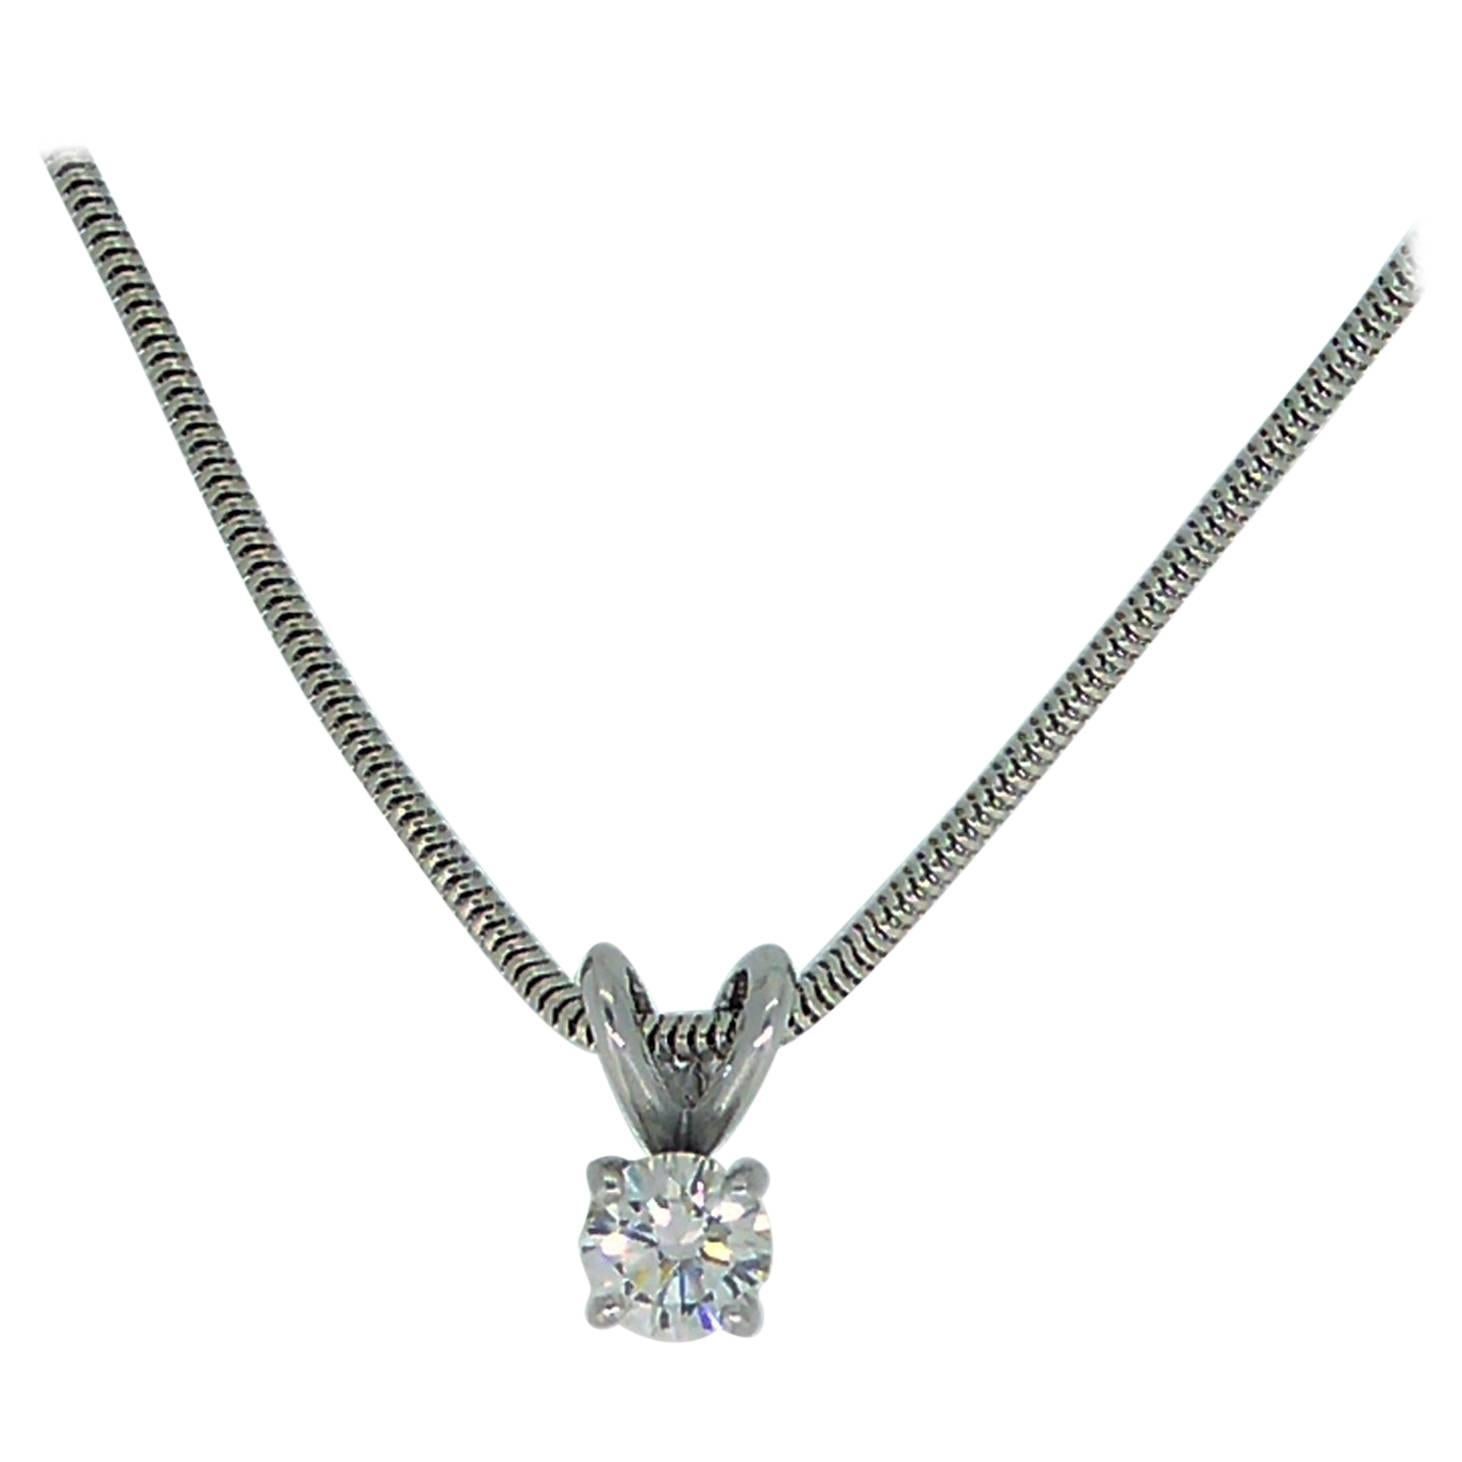 Vintage 0.65 Carat Diamond Solitaire Necklace with 18 Carat White Gold Chain